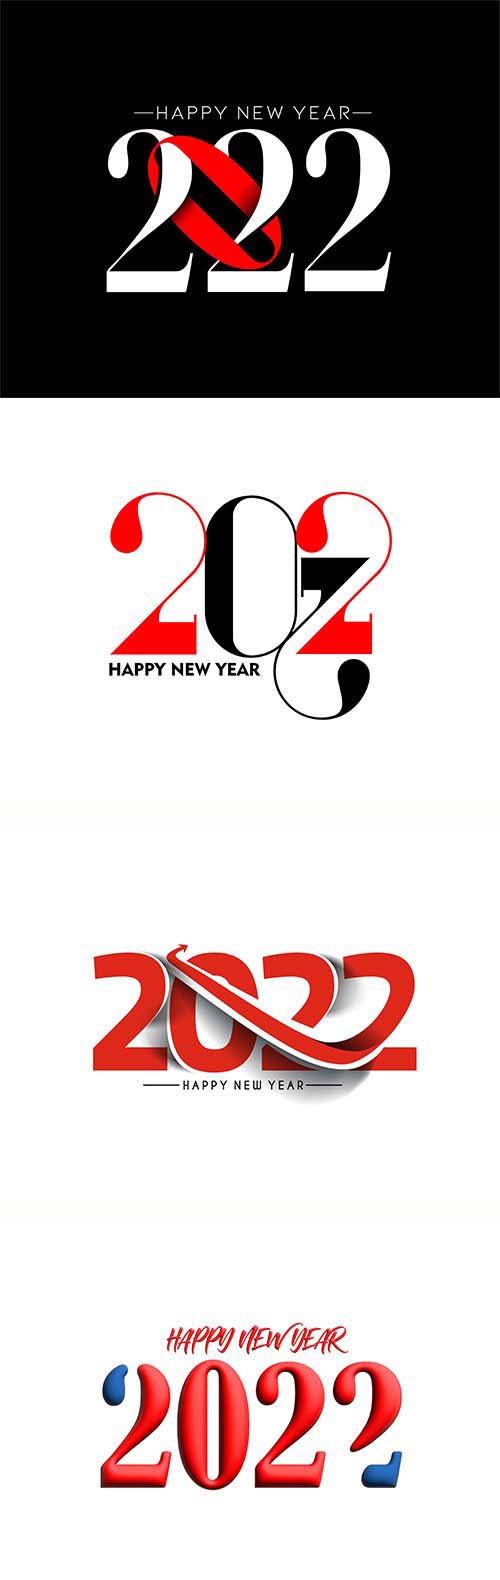 Happy new year 2022 text typography design vector illustration